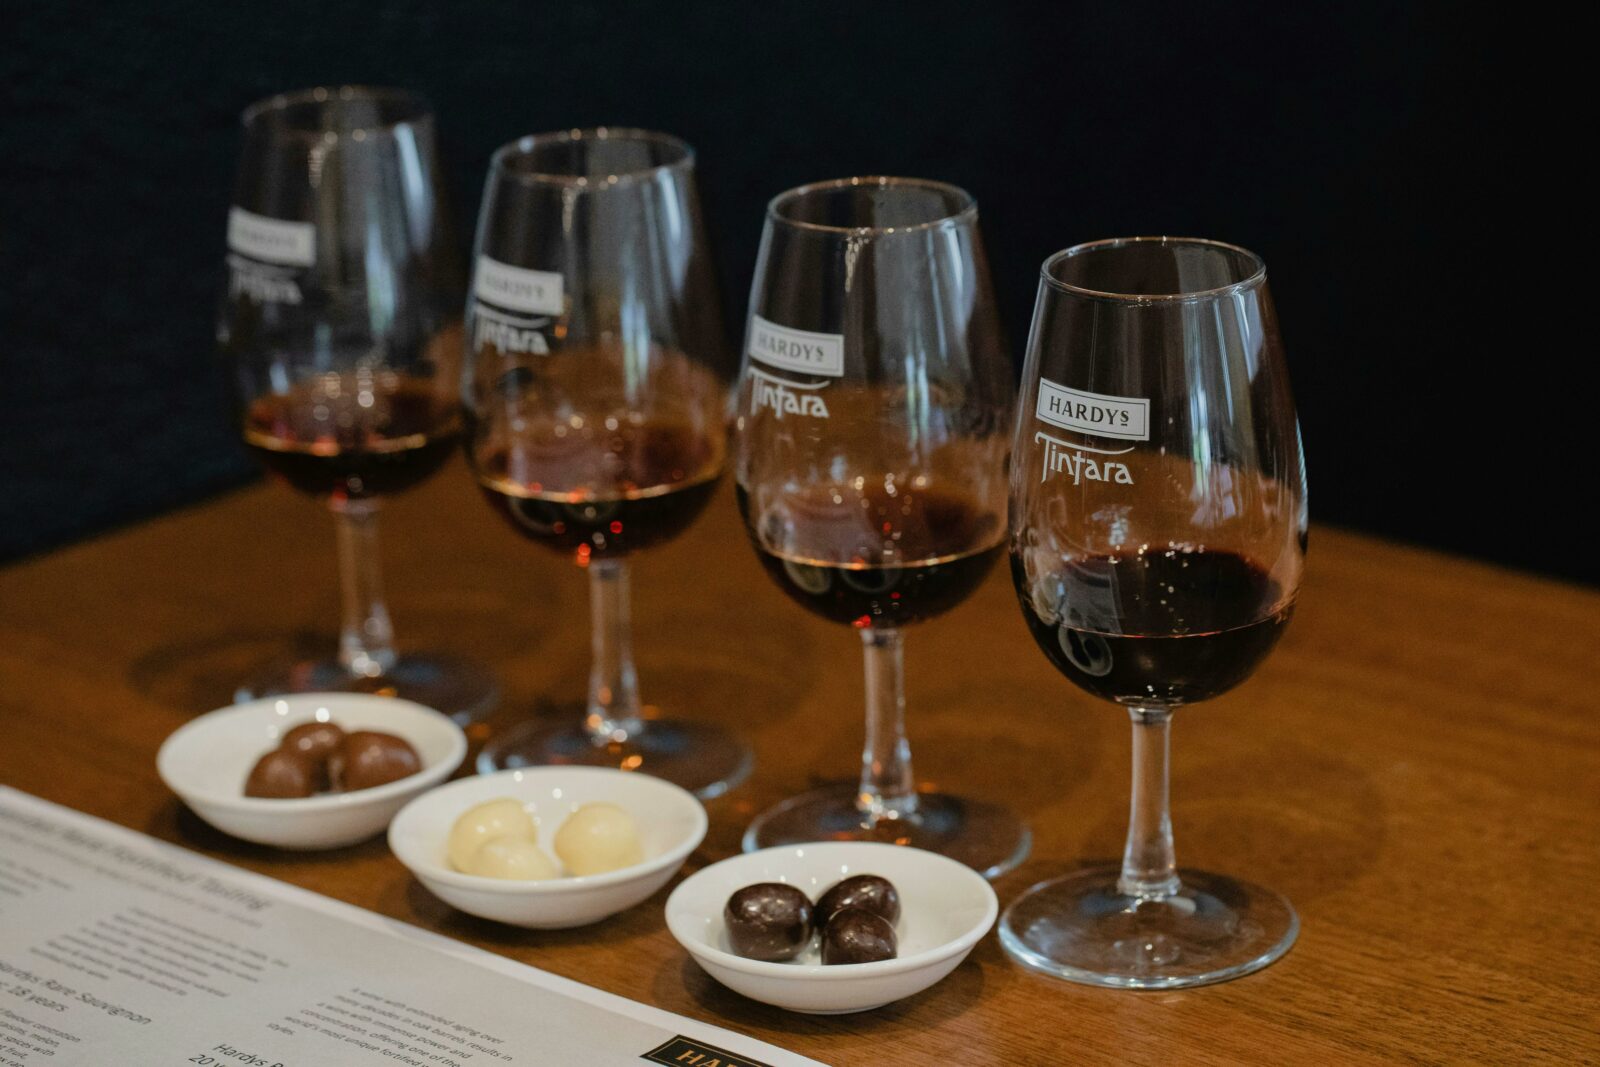 Hardys Rare Fortified Tasting Experience